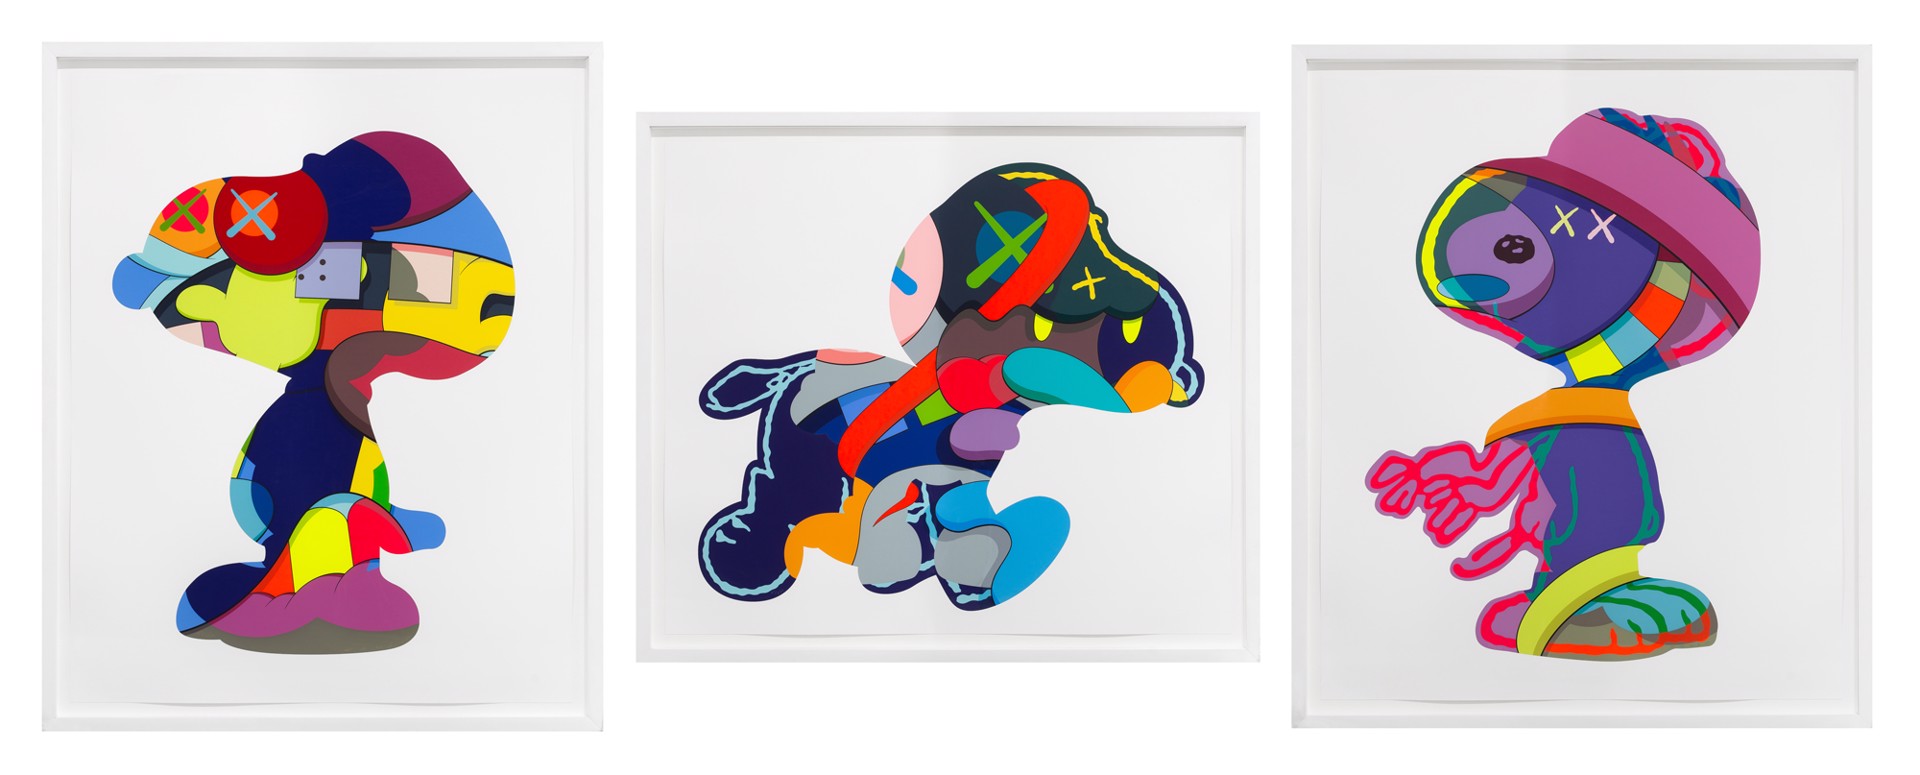 NO ONE'S HOME, STAY STEADY, THE THINGS THAT COMFORT by KAWS